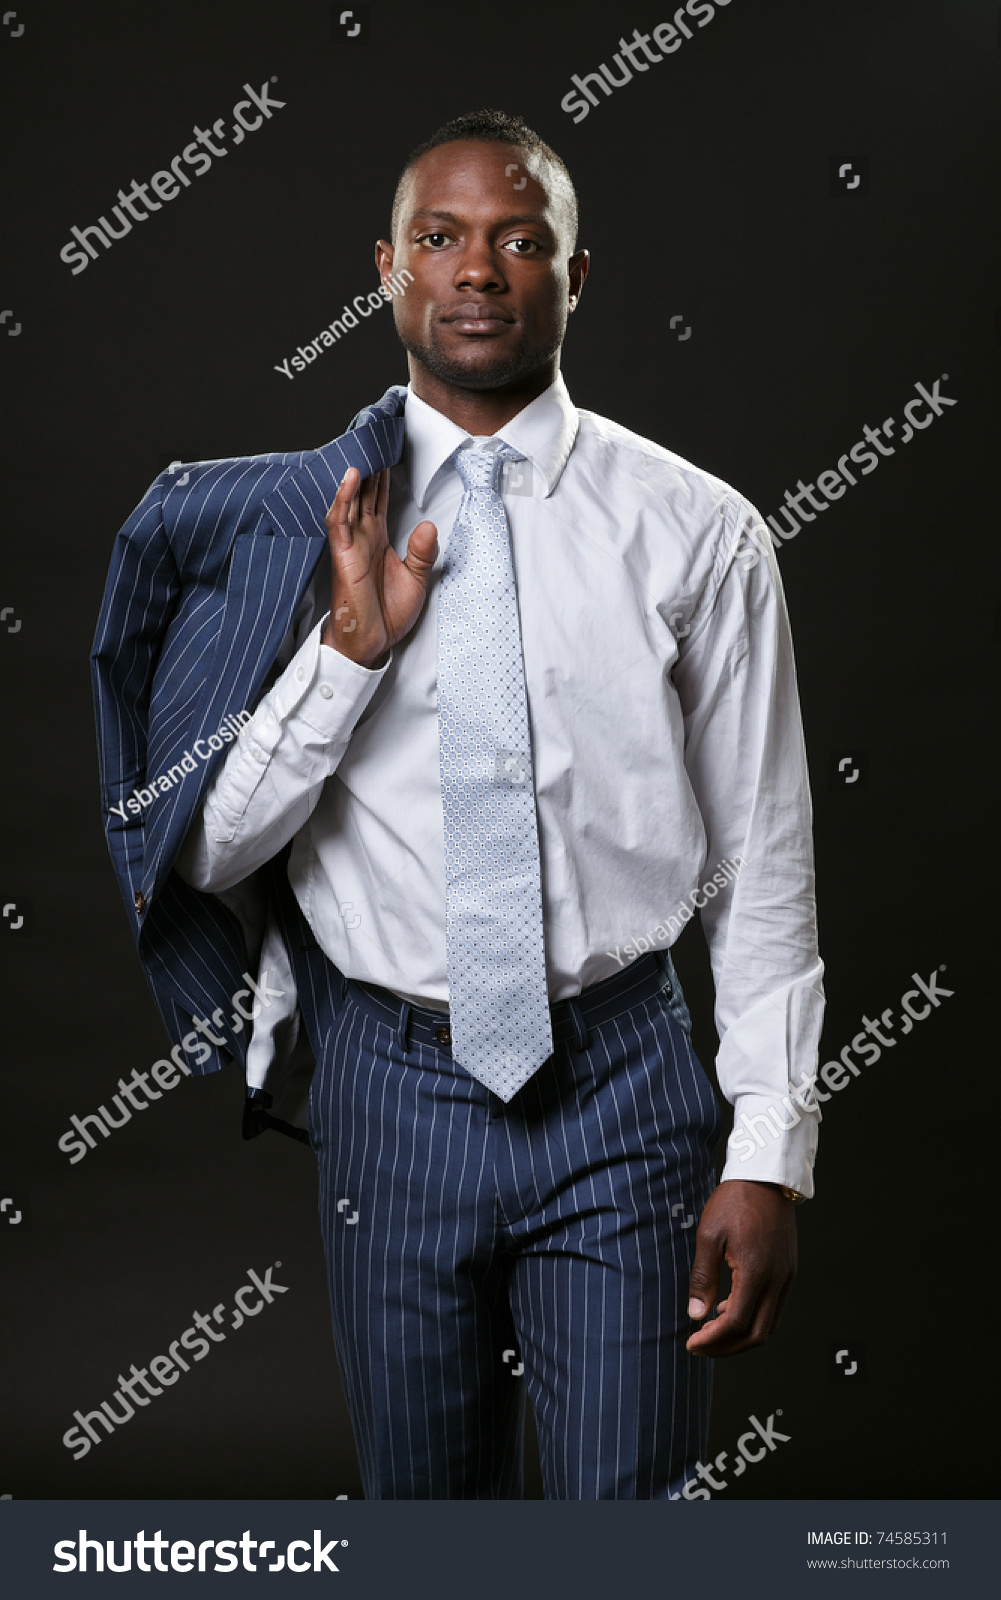 Serious Black Young Business Man In Suit Holds Jacket Over Shoulder ...